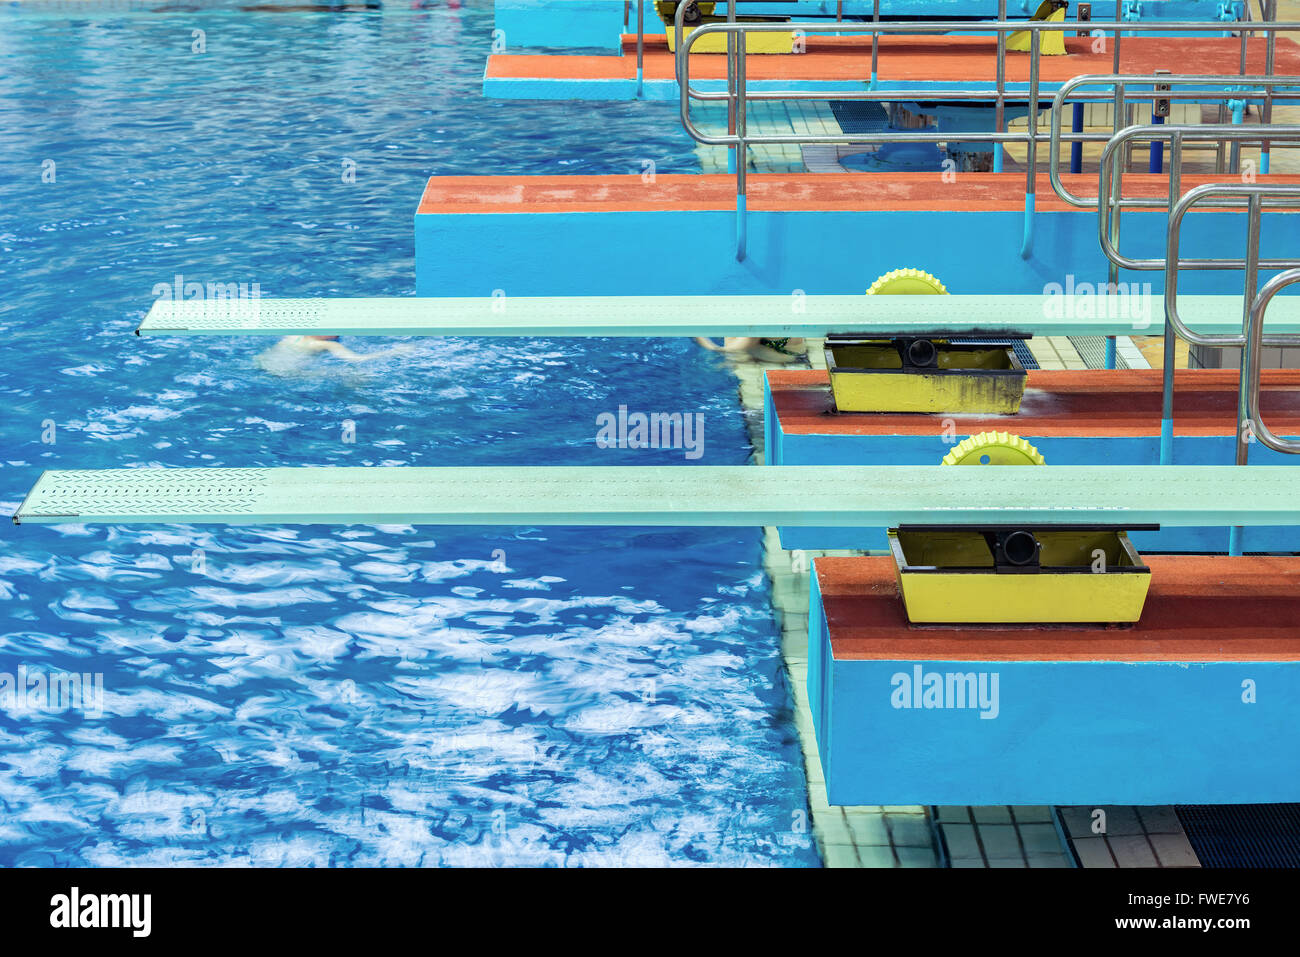 Several diving boards in the swimimg pool. Stock Photo